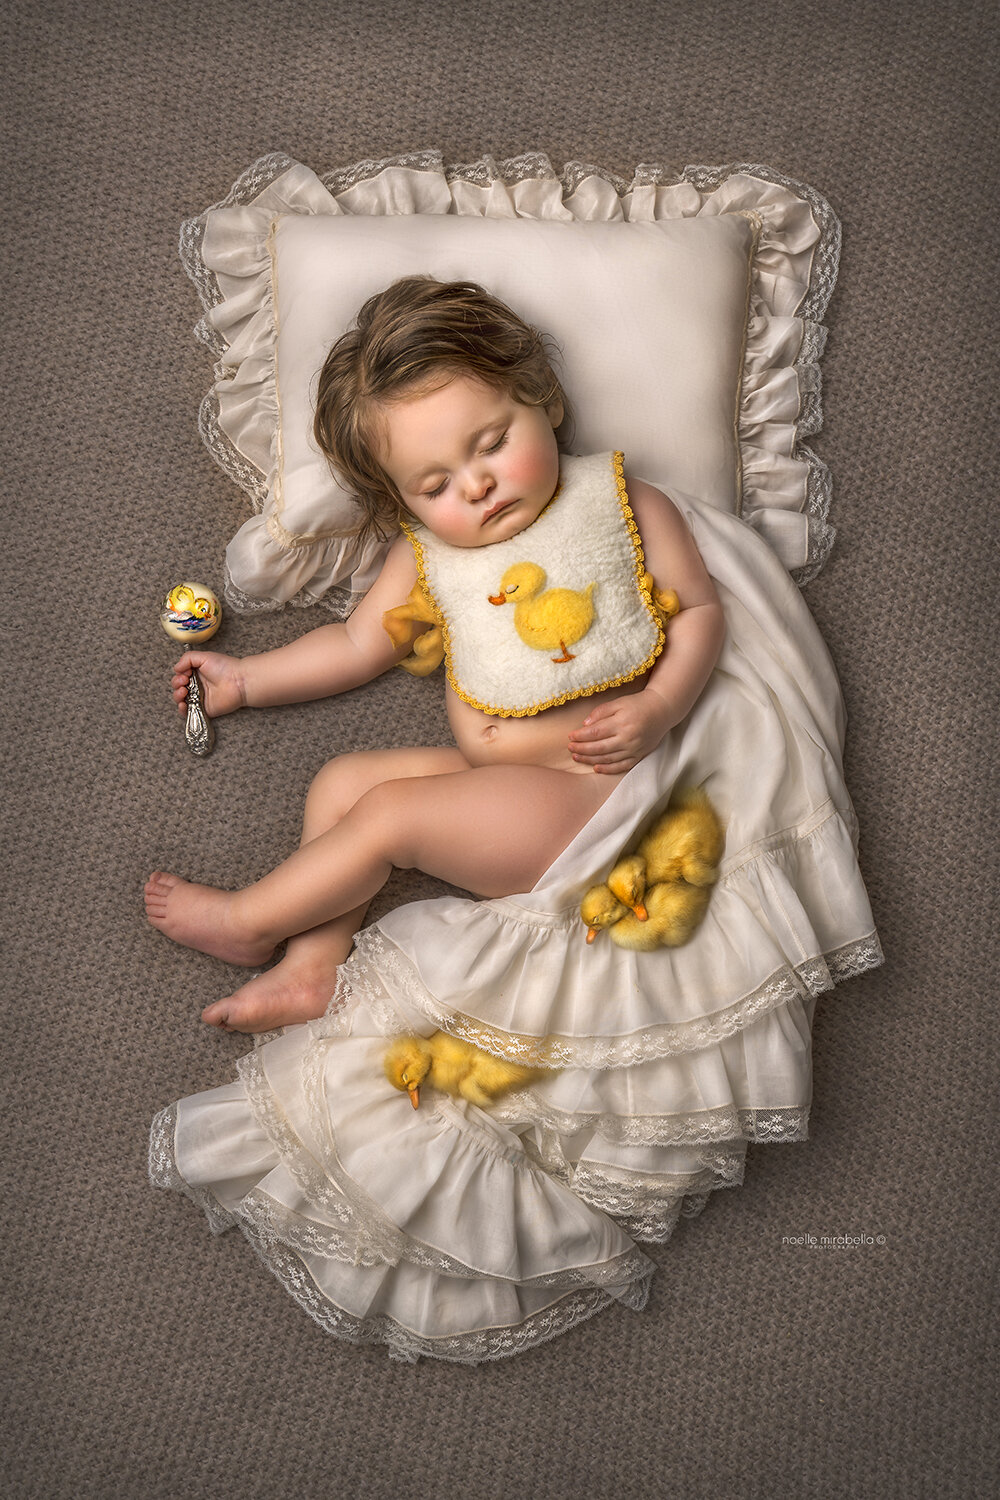 Sleeping baby wearing a ducky bib, and snuggling with baby ducklings.